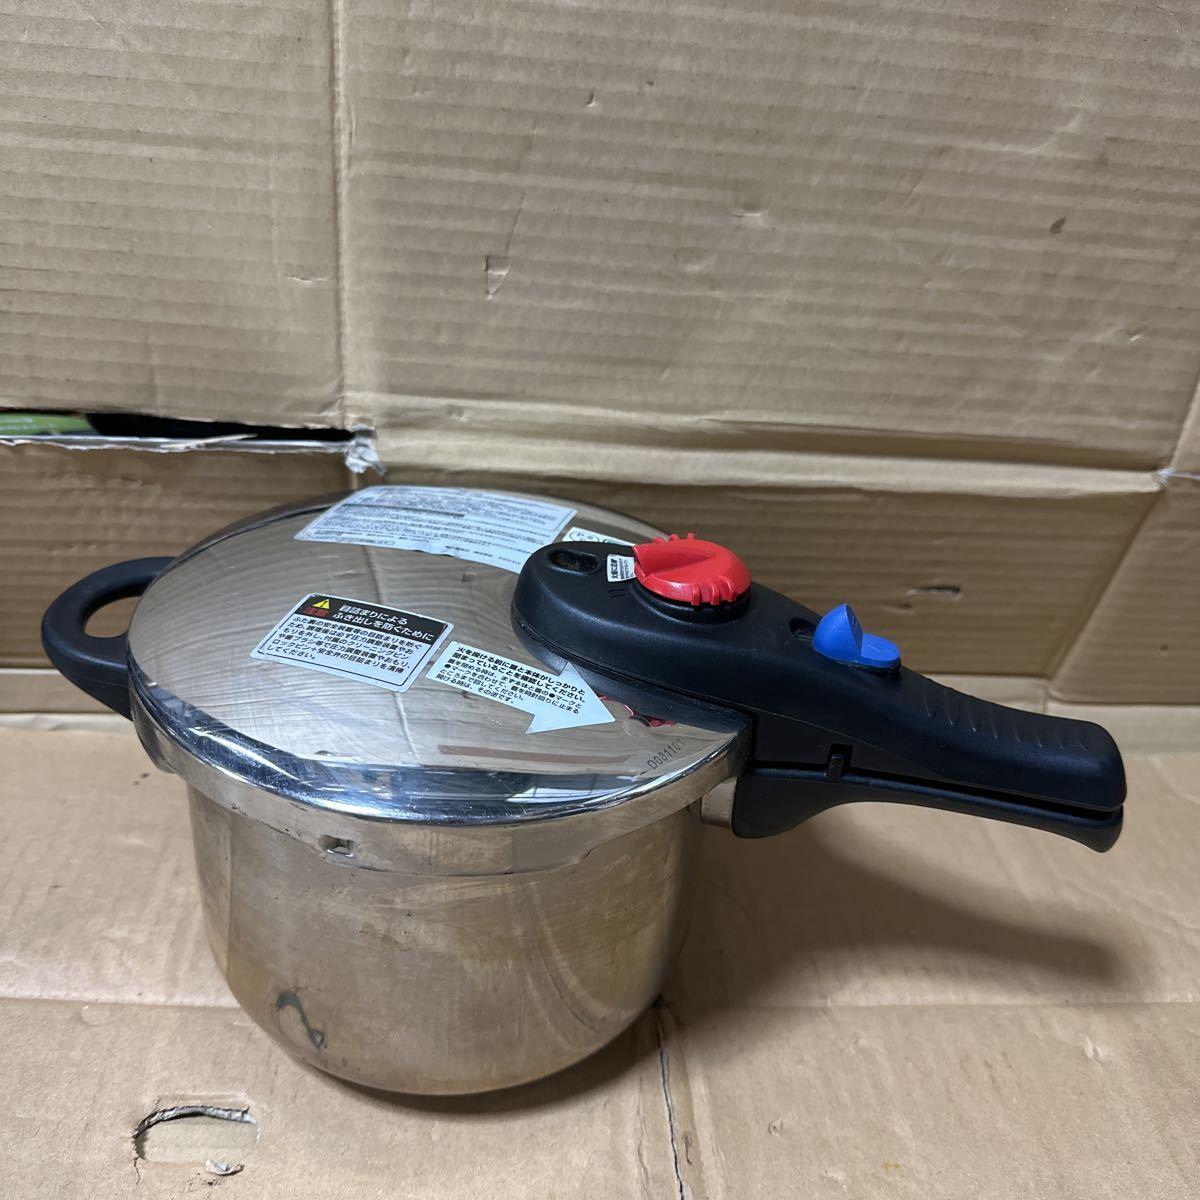 a-3845) pressure cooker / used present condition goods used present condition goods..